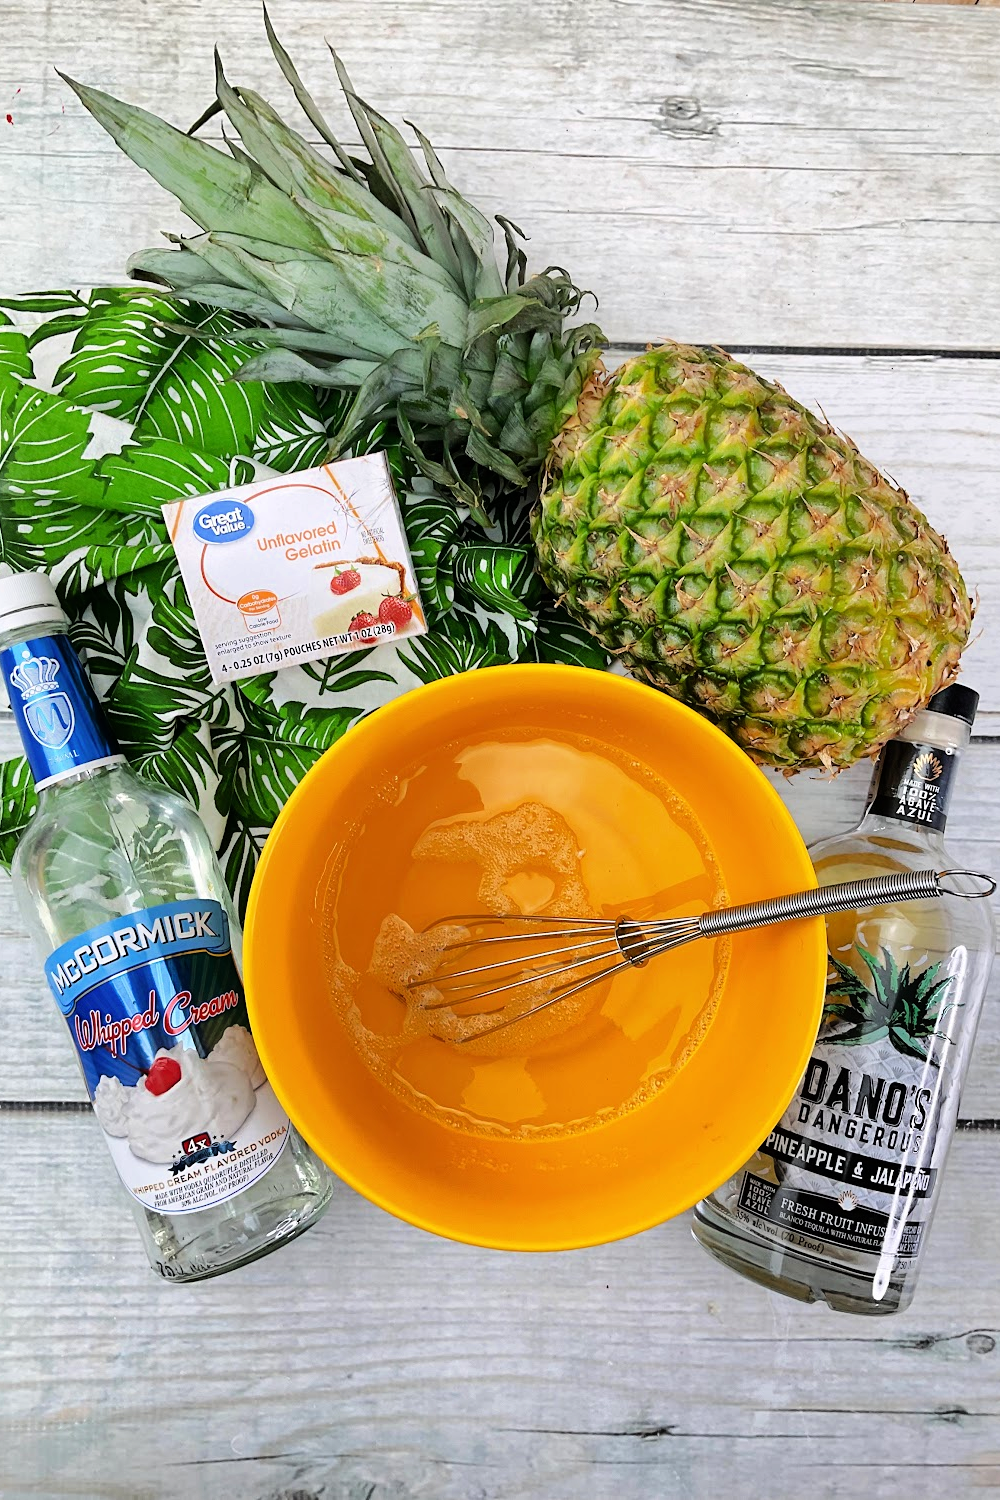 Dole whip jello shots without whip cream surrounded by ingredients. A whisk in a bowl of jello, bottles of alcohol and a pineapple.